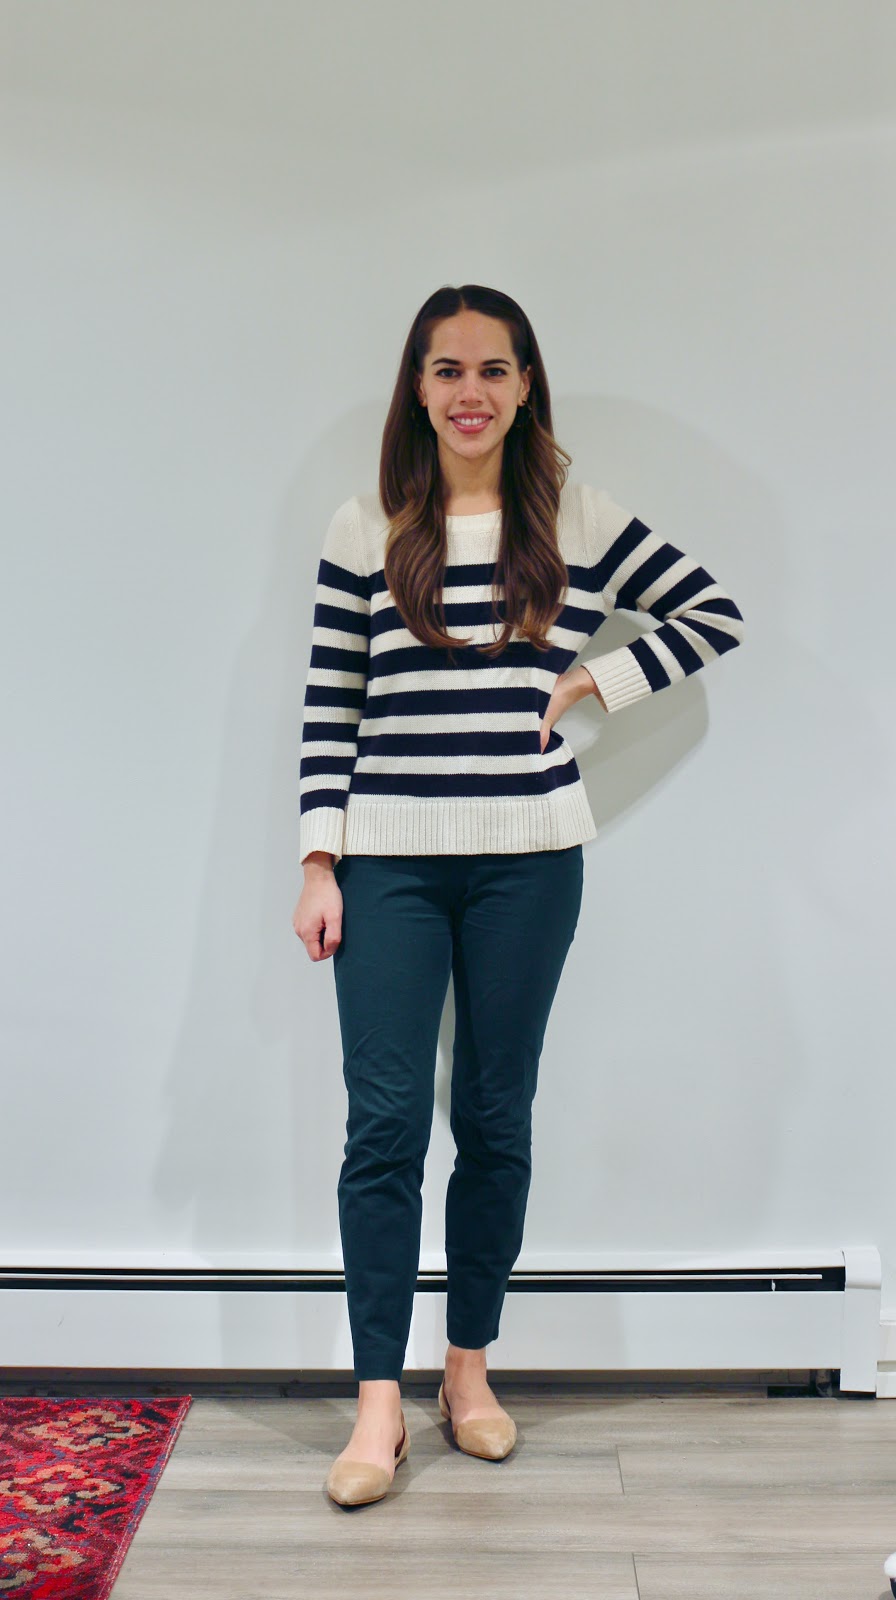 Jules in Flats - Striped Sweater with Green Ankle Pants (Business Casual Winter Workwear on a Budget)